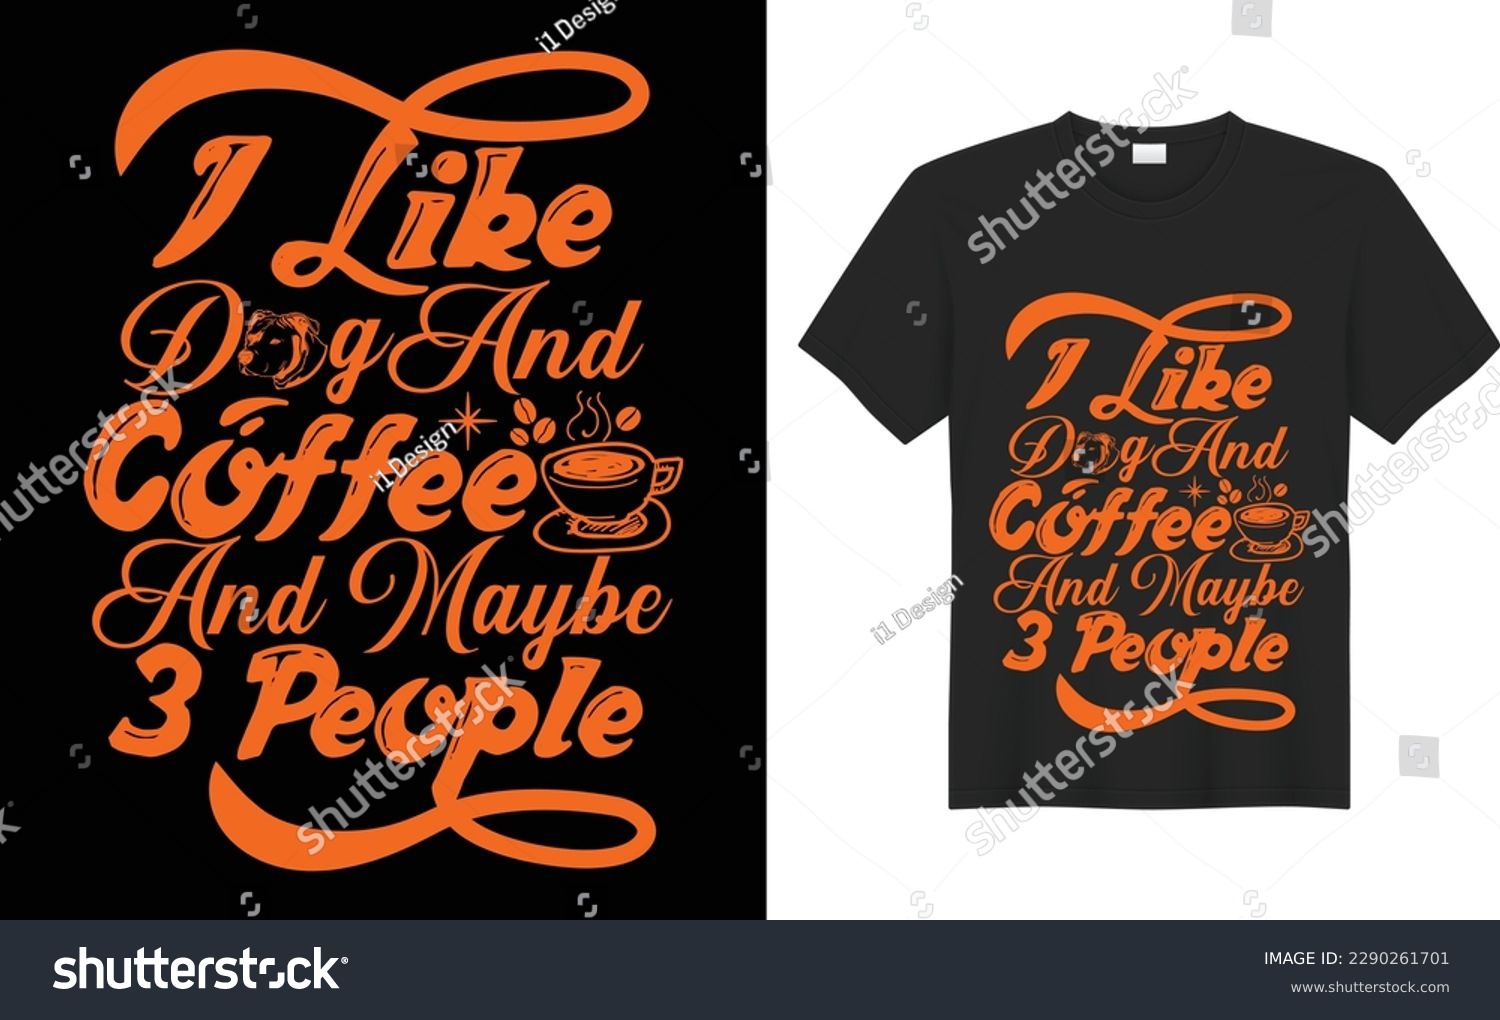 SVG of I Like dog Coffee and Maybe 3 People SVG Typography Colorful T-shirt Design Vector Template. Hand Lettering Illustration And Printing for T-shirt, Banner, Poster, Flyers, Etc. svg